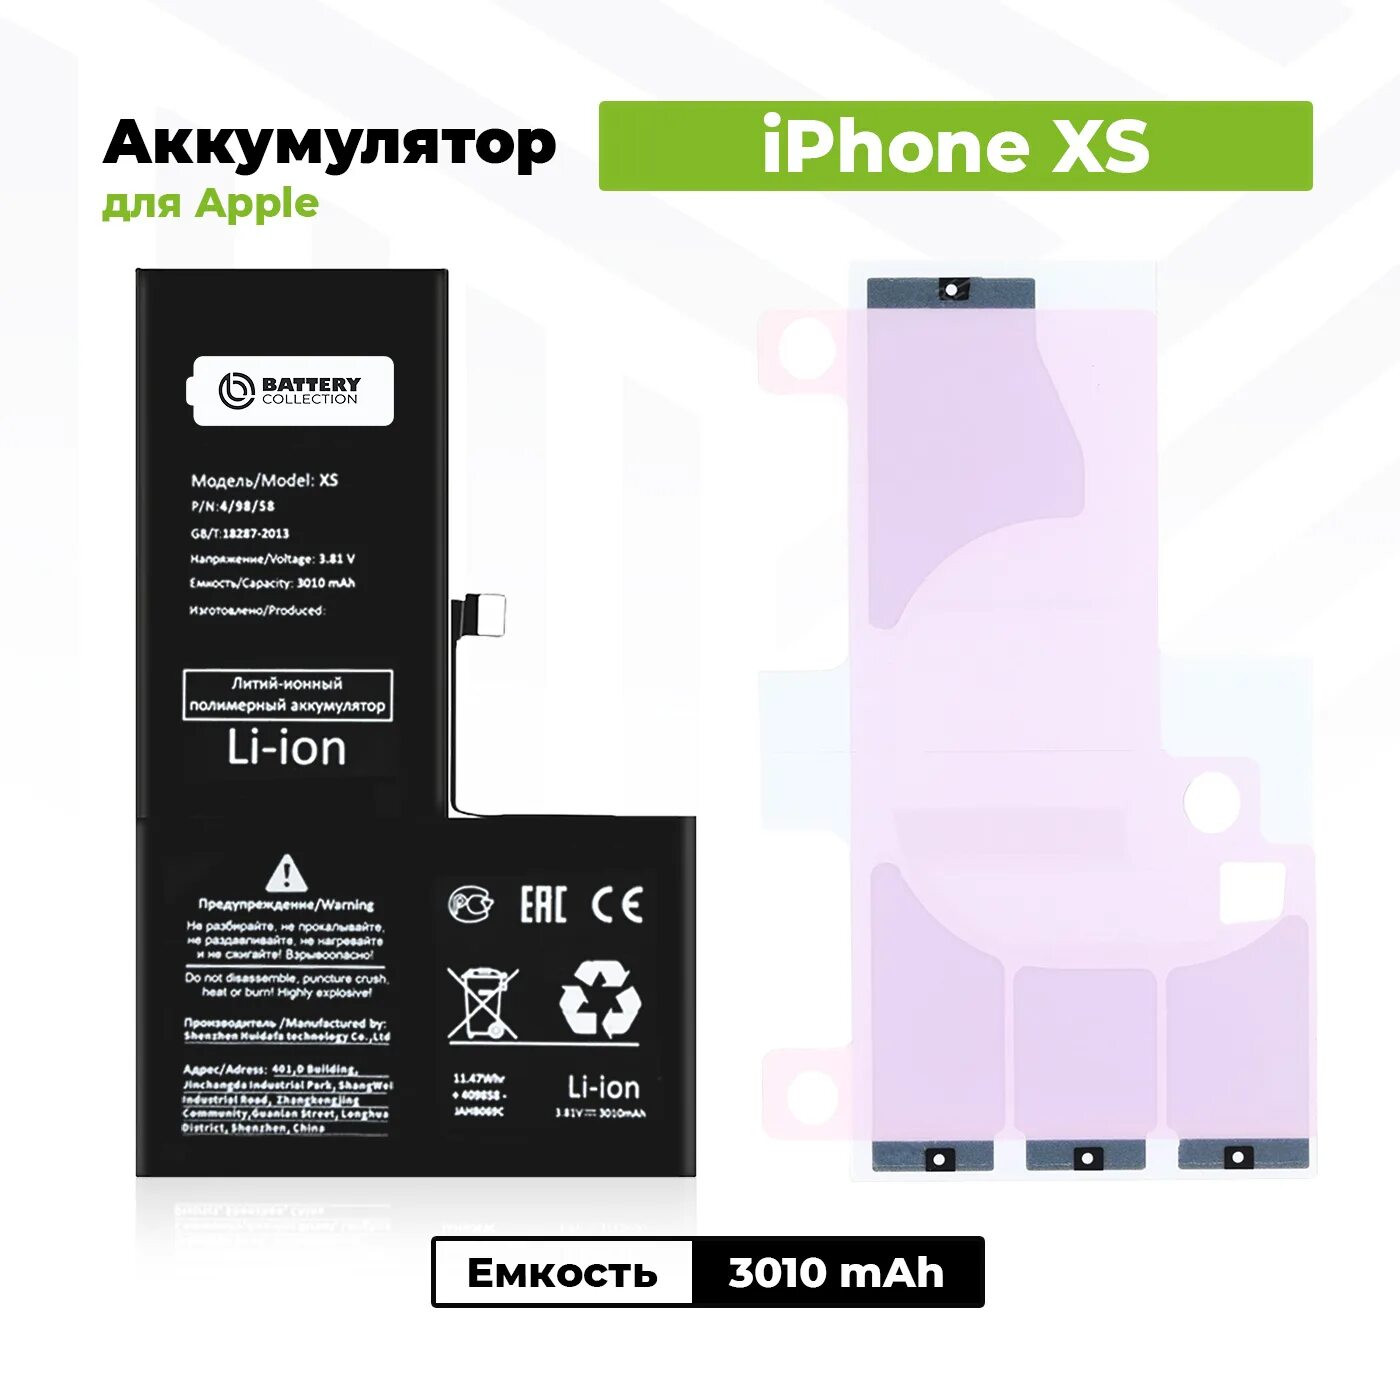 XS Max батарея. АКБ айфон XS Max. Apple iphone XS АКБ. Аккумулятор для Apple iphone 13 Pro Max - Battery collection. Battery collection